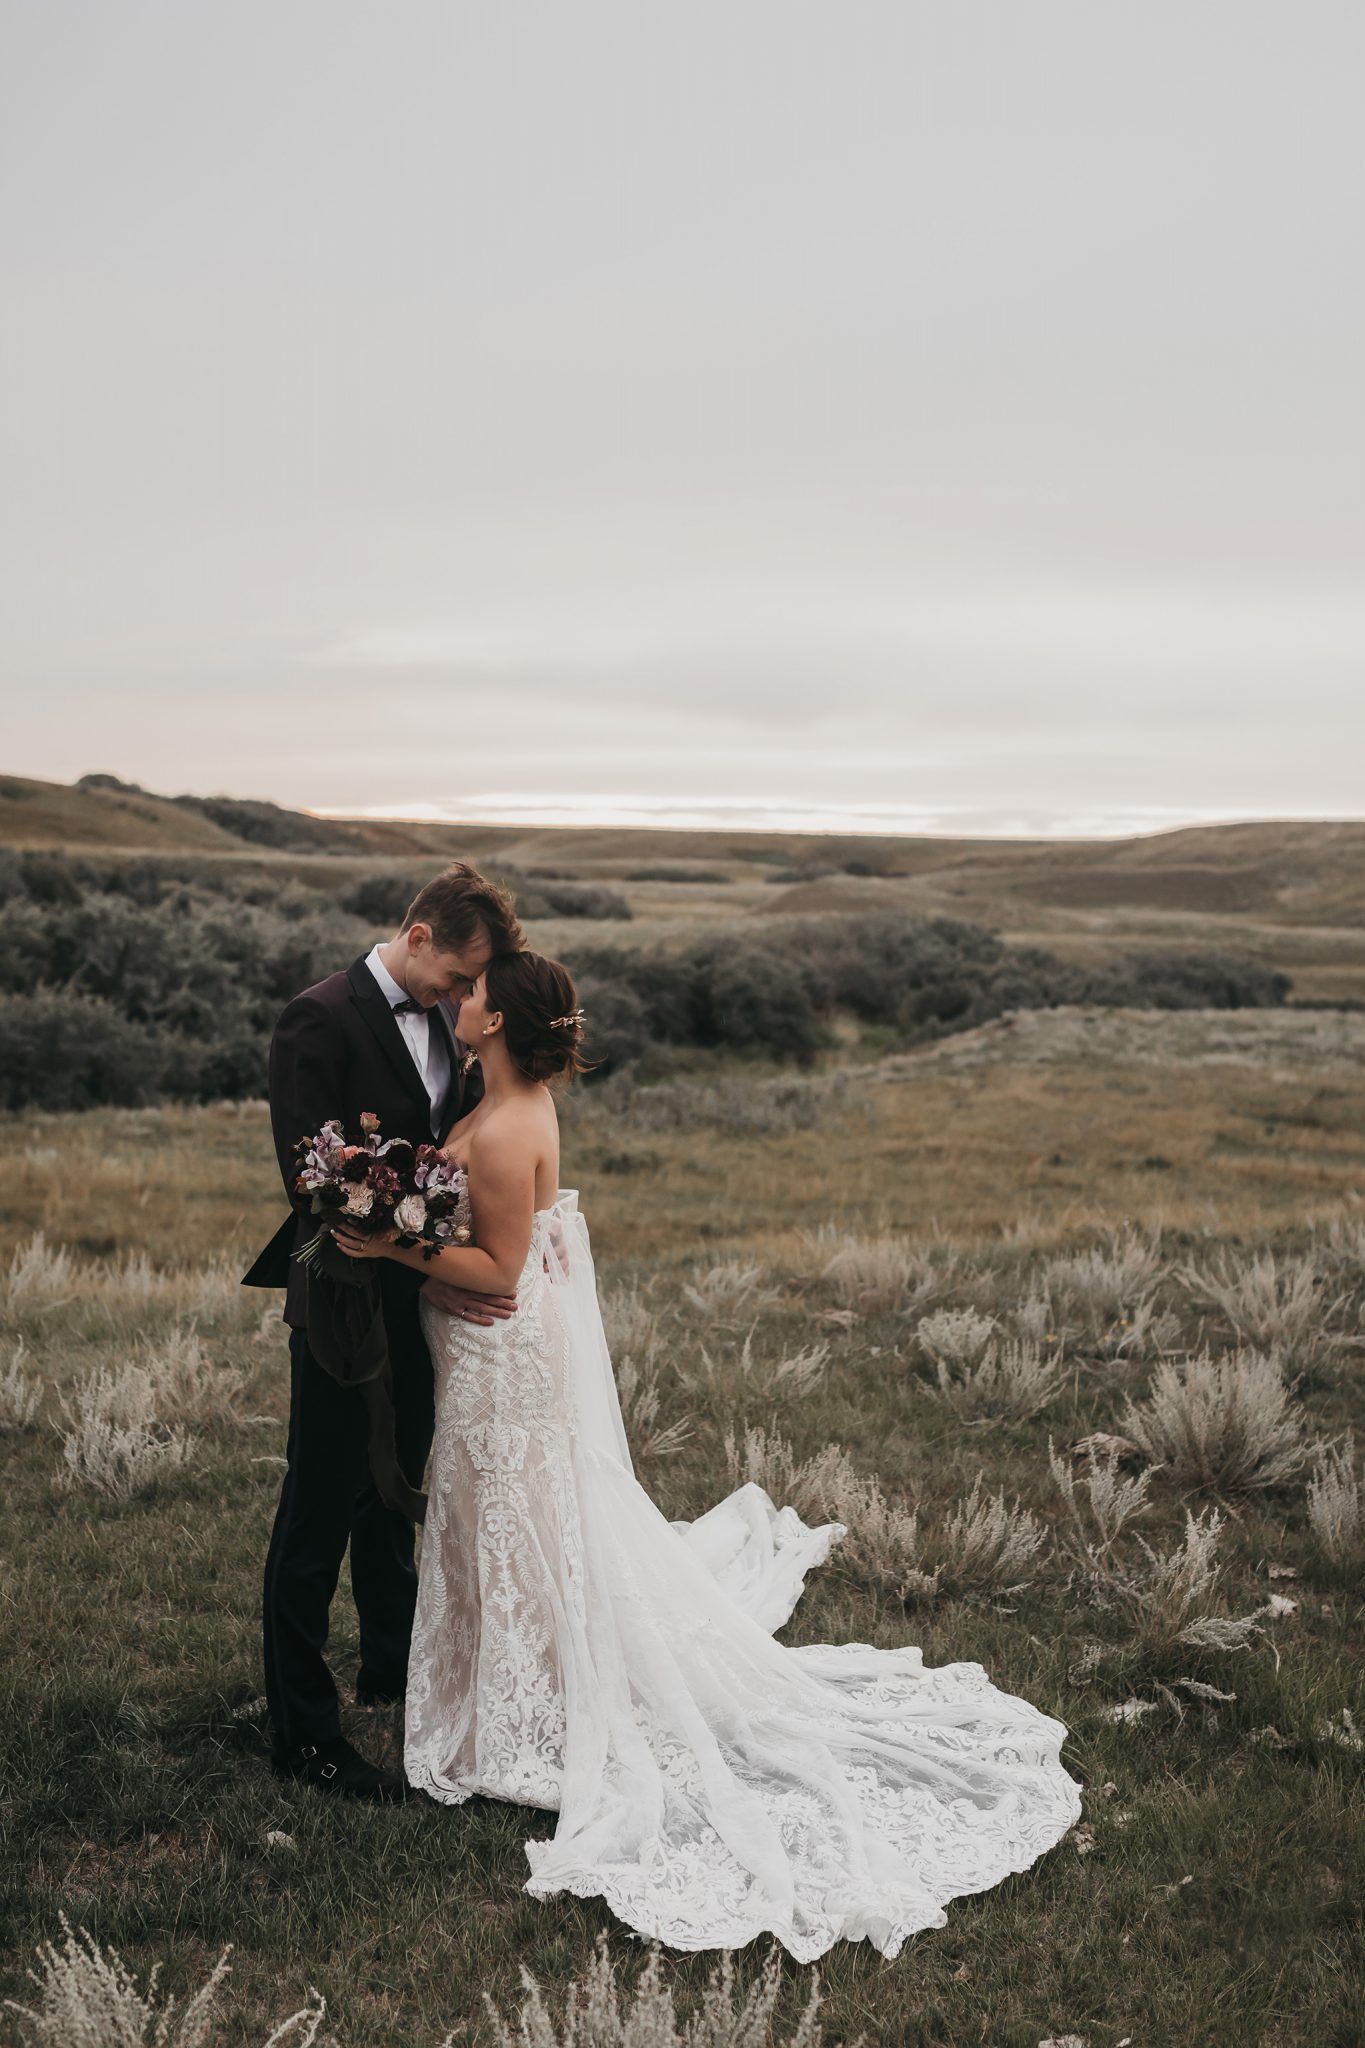 Real Wedding - Countryside Nuptials & Moroccan Styled Reception - featured on Junebug and Bronte Bride, intimate wedding photos, kadie hummel photography